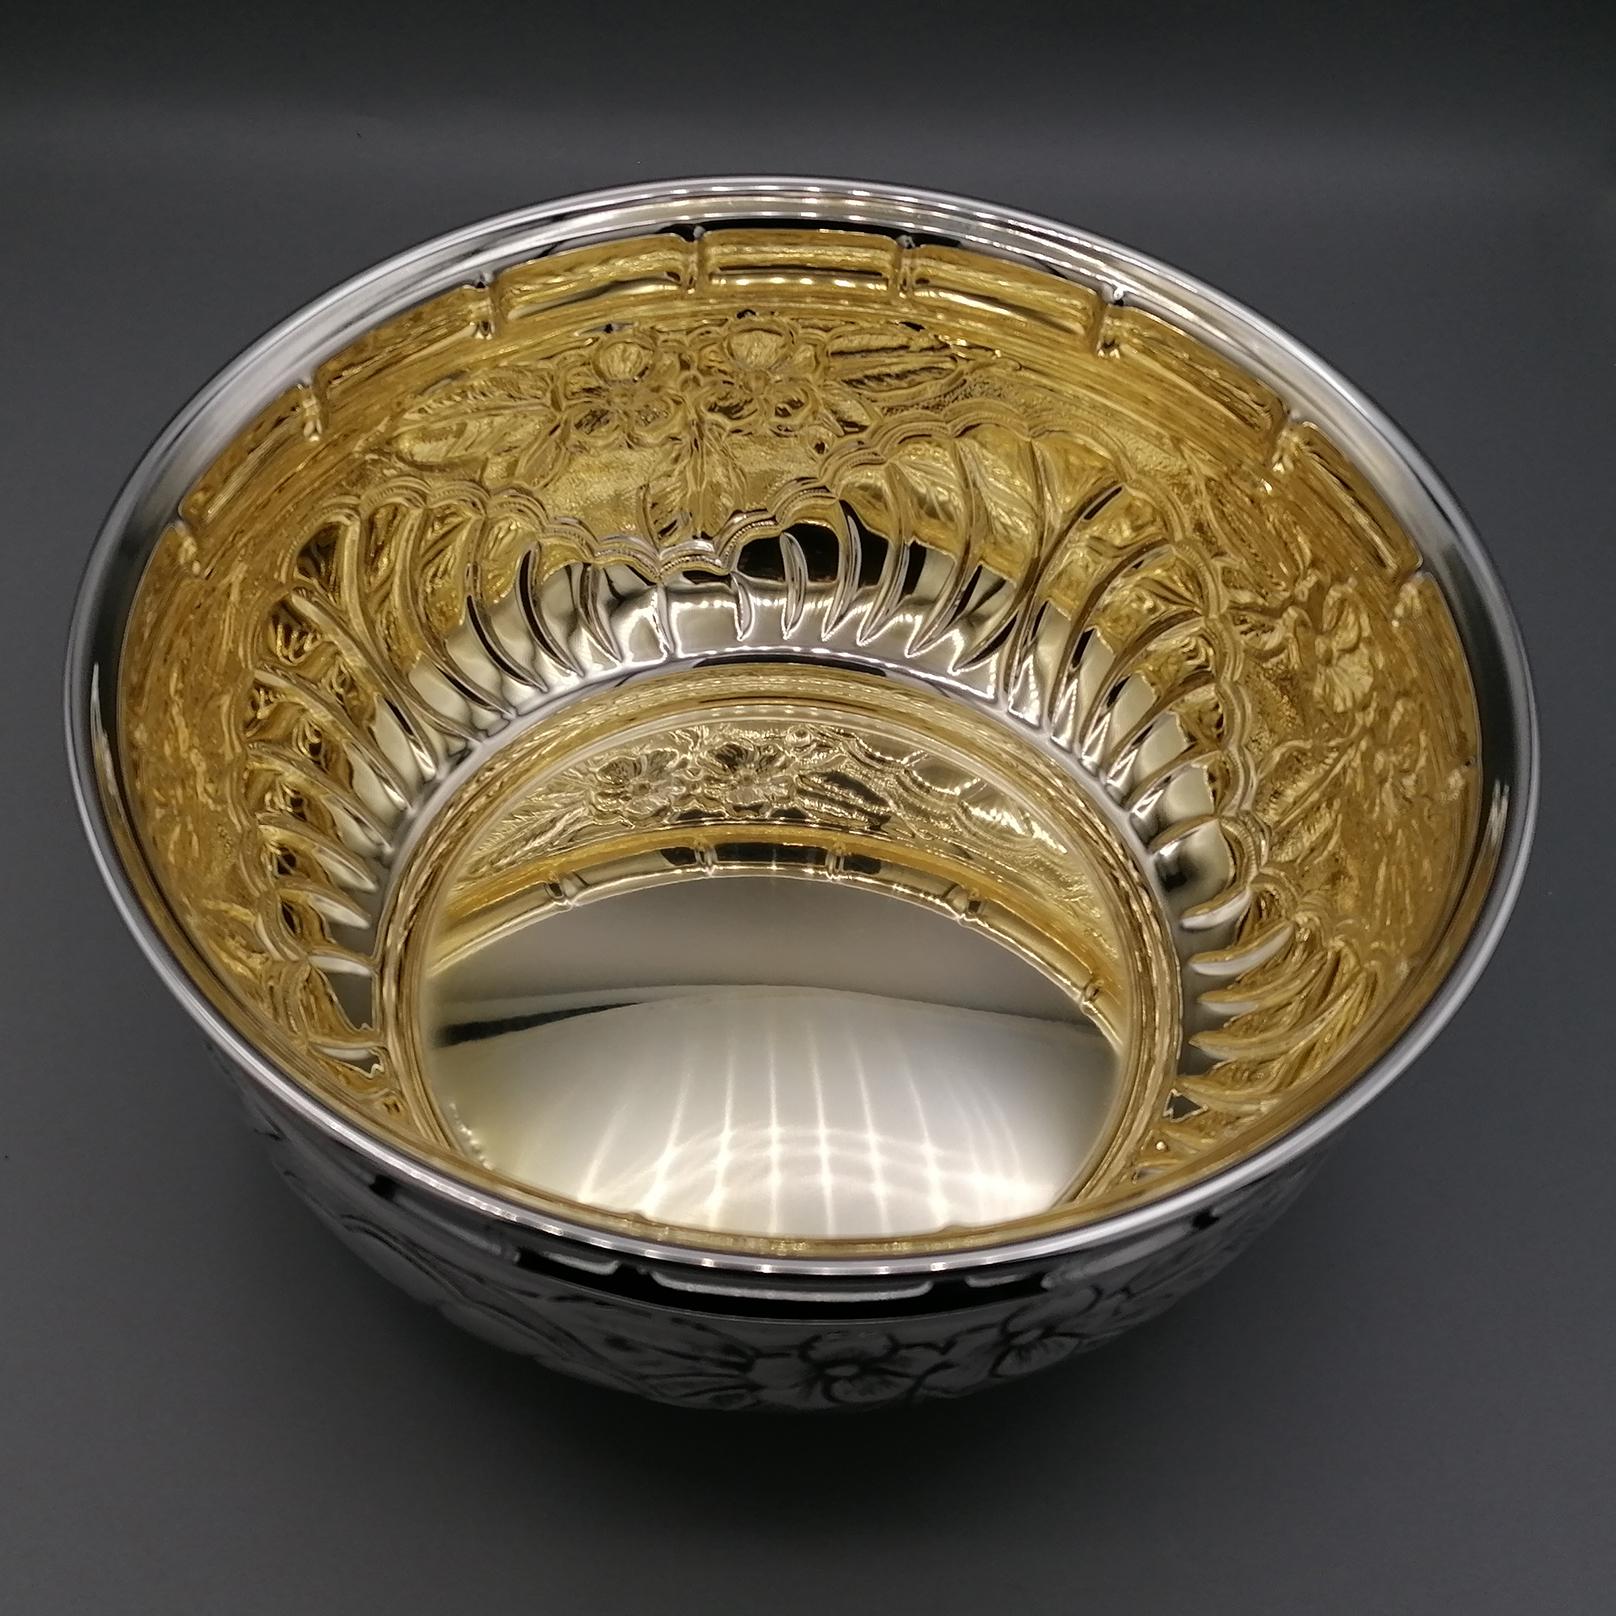 Hand-Crafted 21st Century Italia Solid Silver 800 Decorated Bowl For Sale